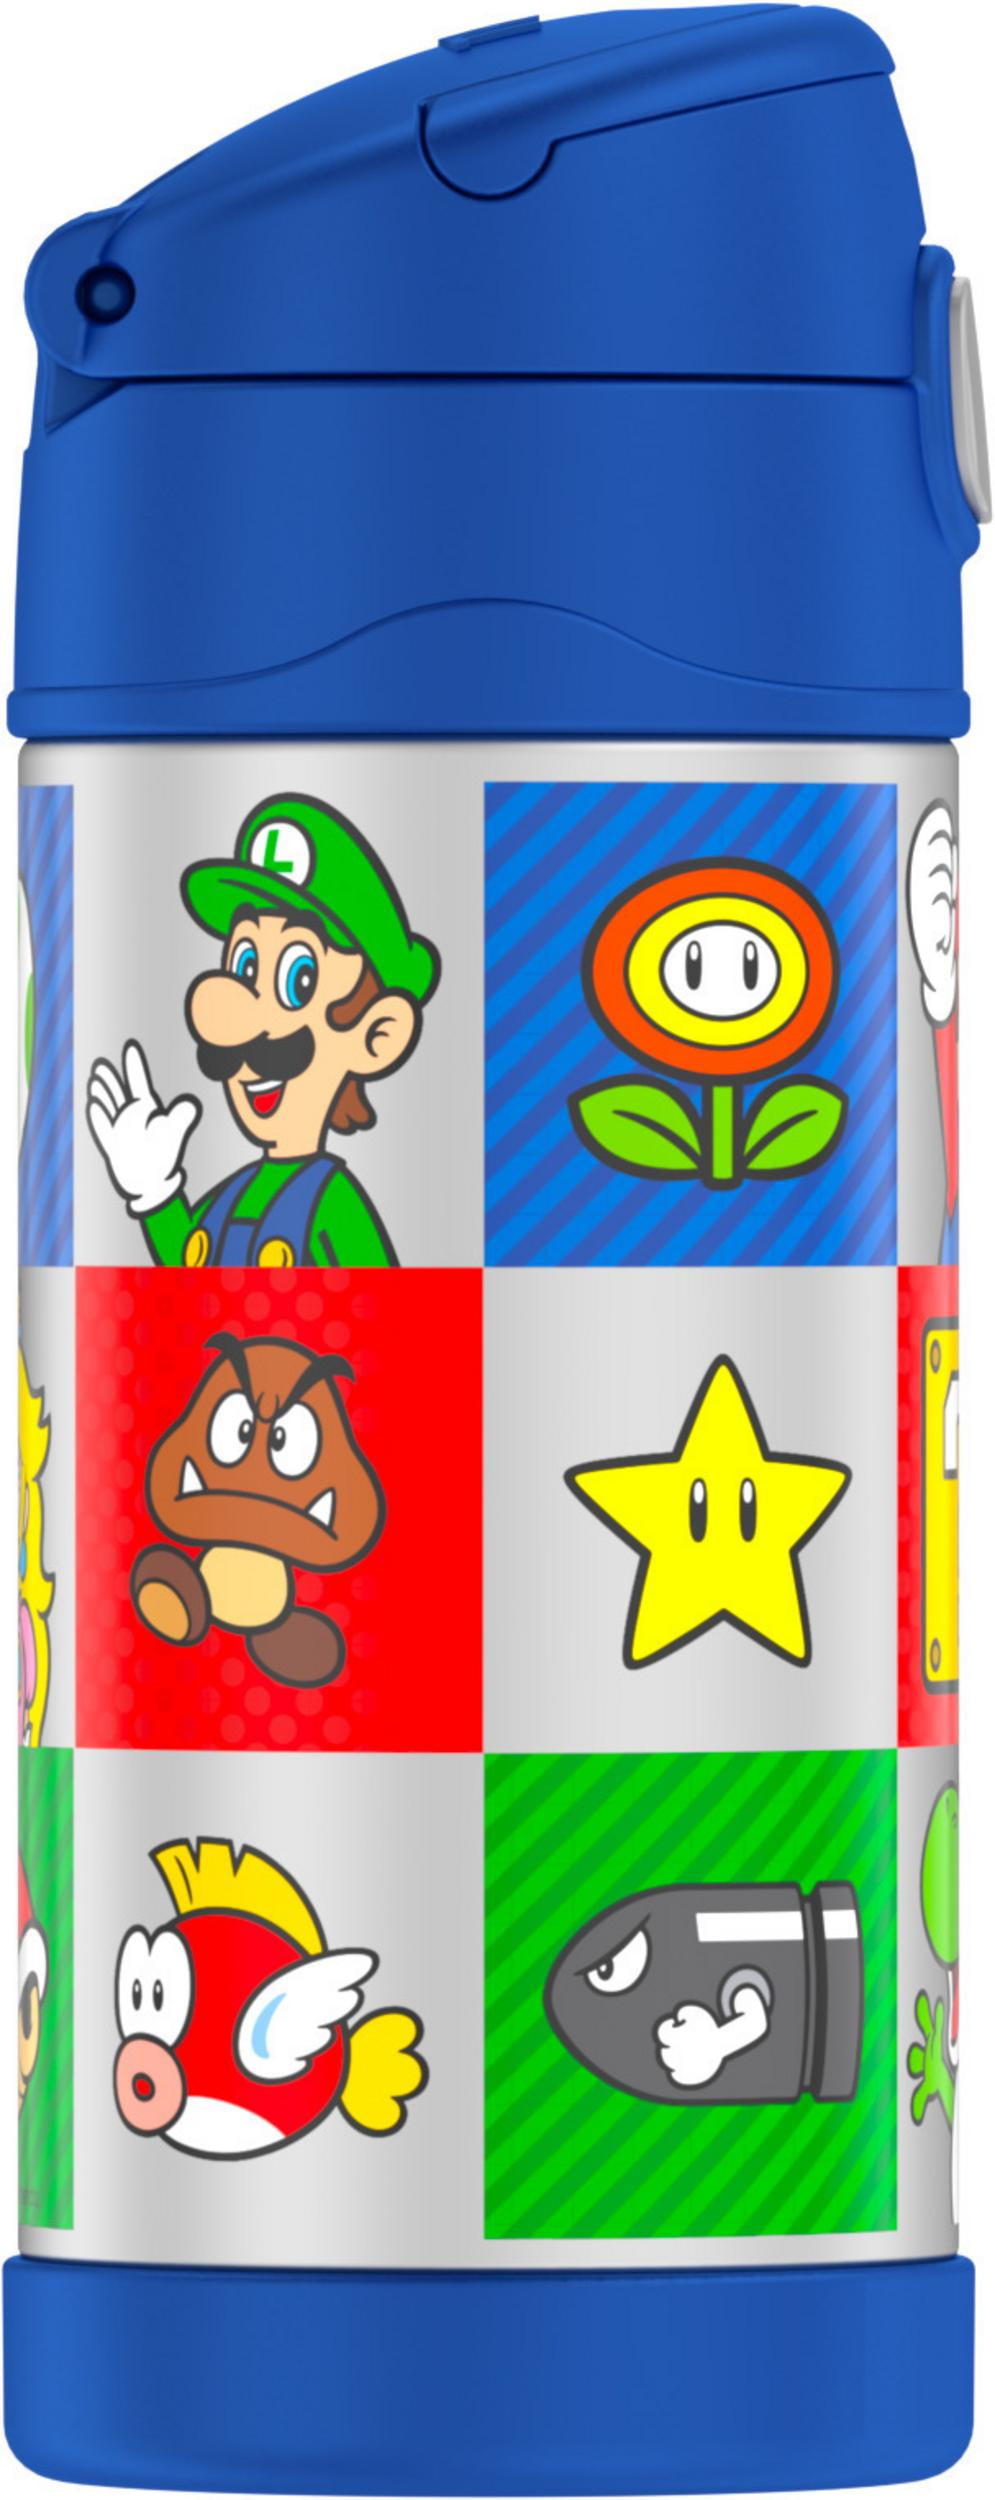 thermos f4019mbg6 super mario brothers funtainer 12 ounce bottle 